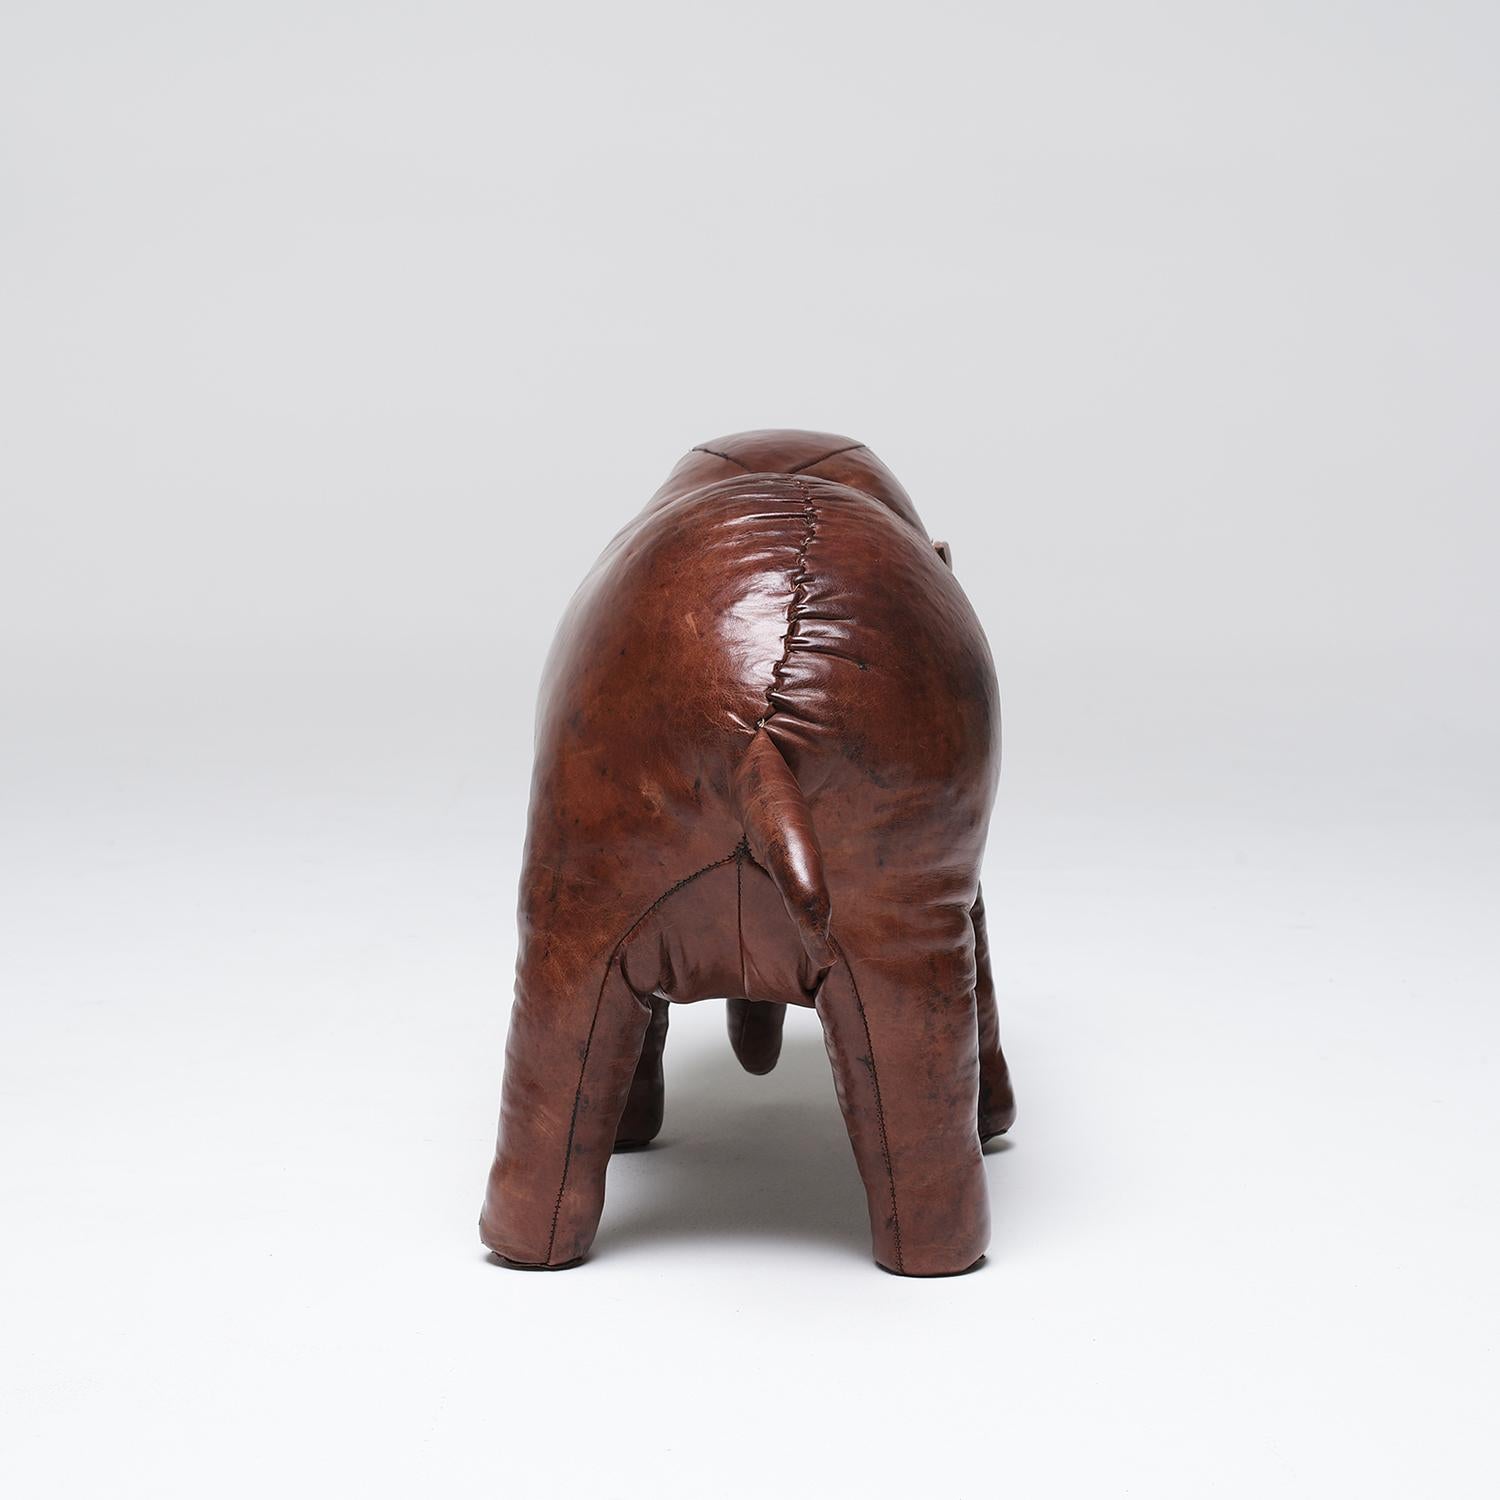 A vintage English hand crafted leather footstool in the shape of an elephant designed by Dimitri Omersa. Minor fading, due to age. Wear consistent with age and use. Circa 1970, United Kingdom.

Dimitri Omersa was born in Yugoslavia. He came to